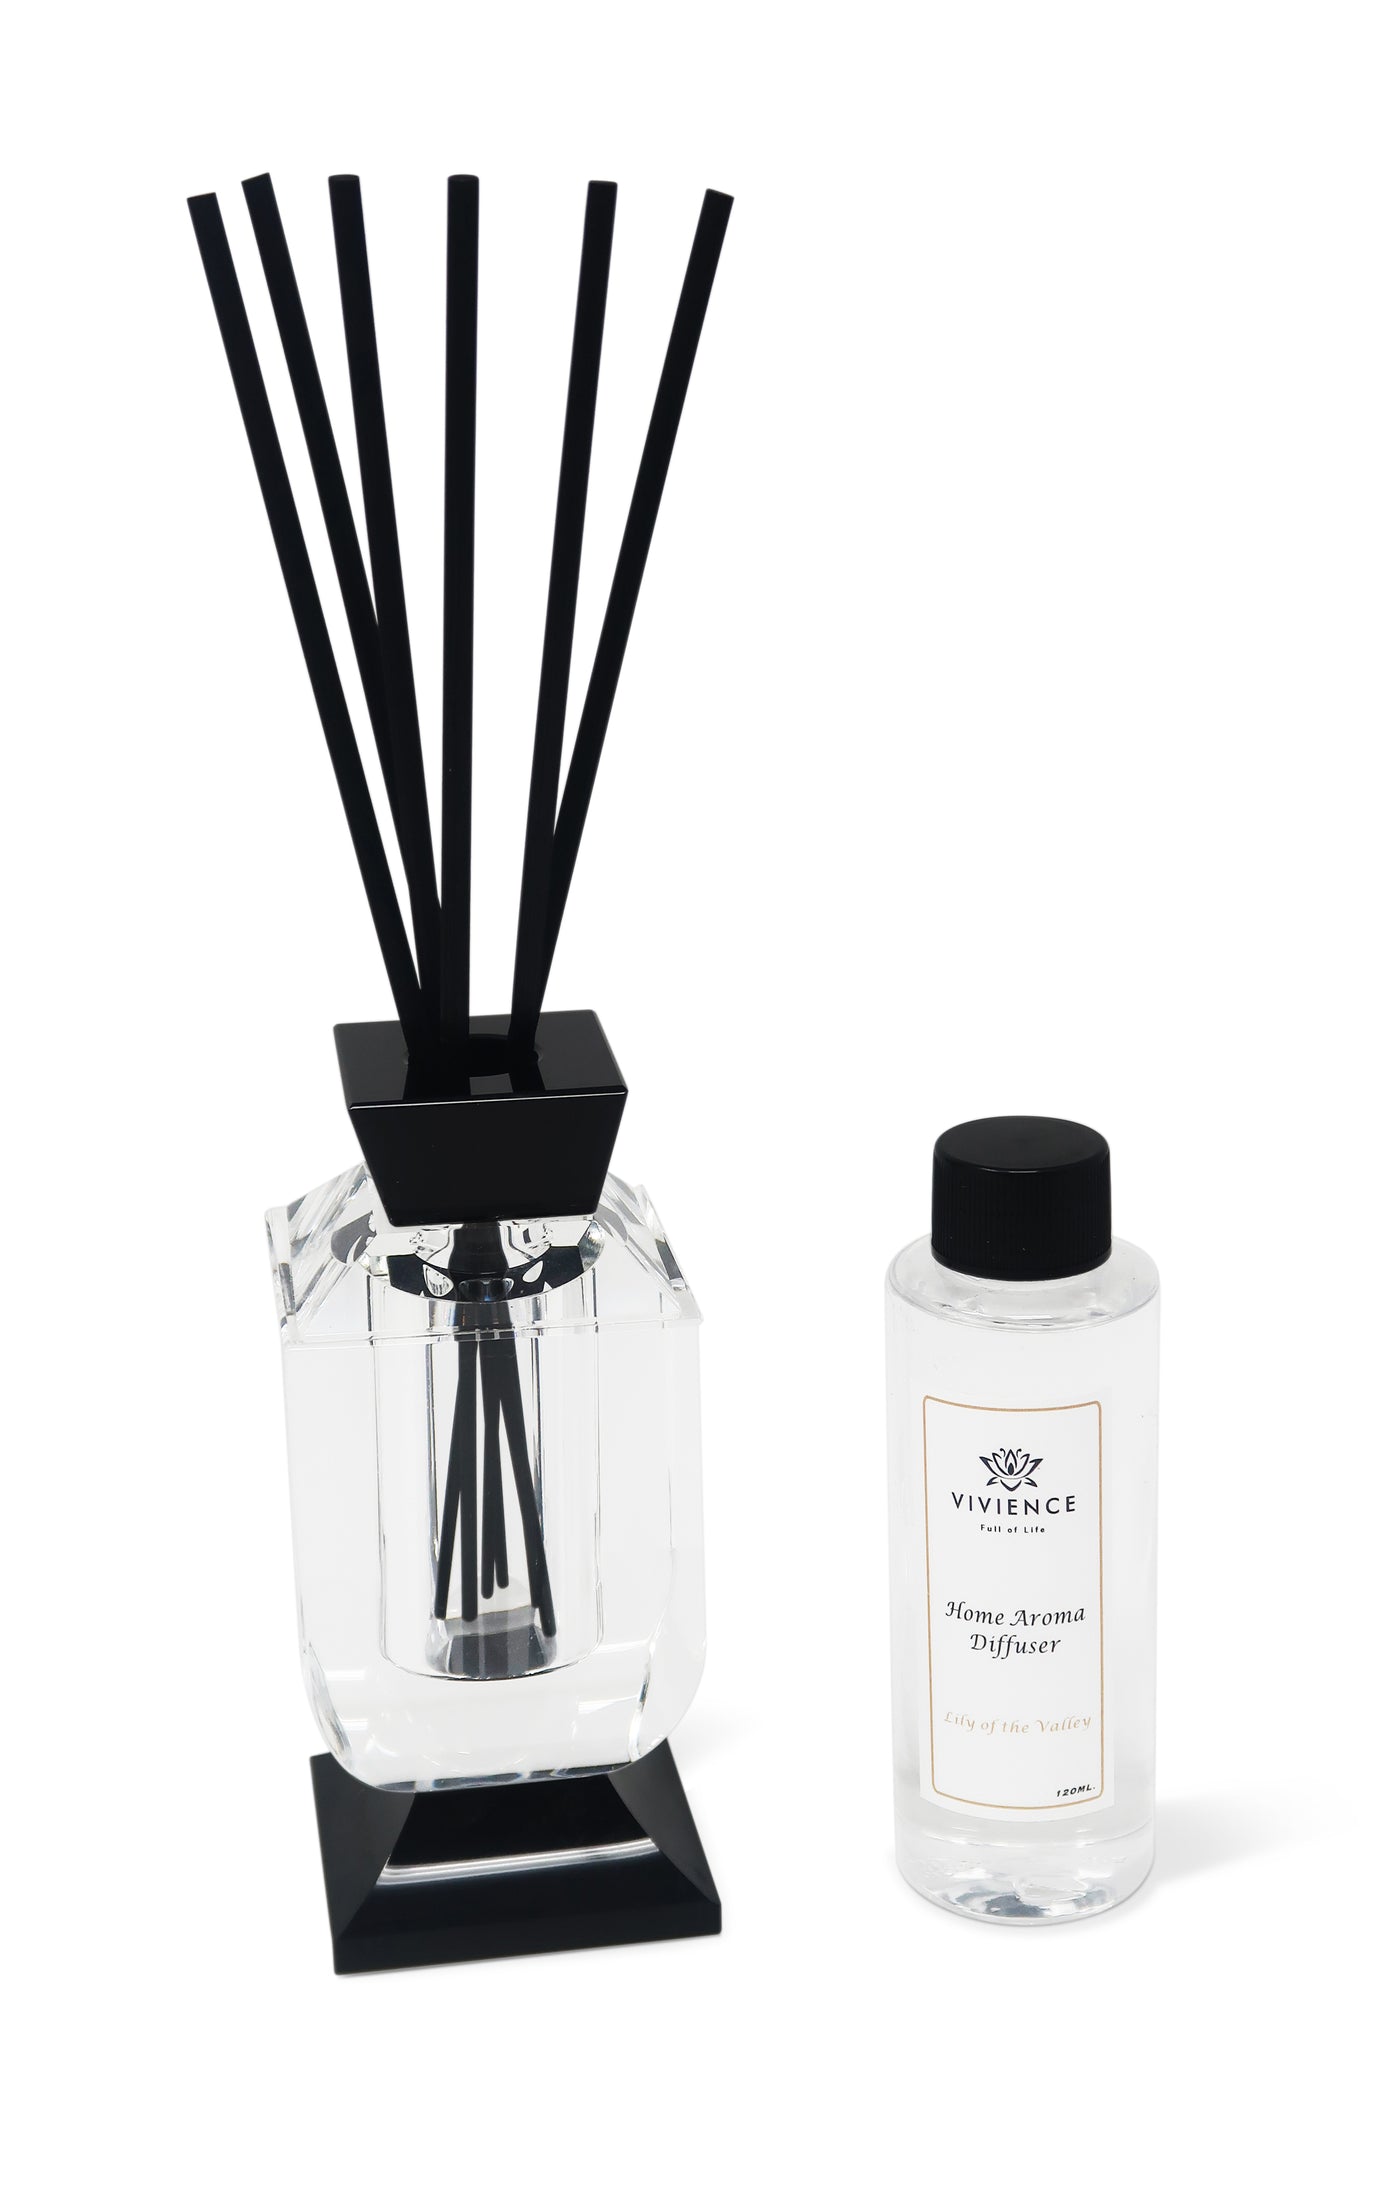 Crystal Diffuser with Black Accents - Lily of the Valley Scent